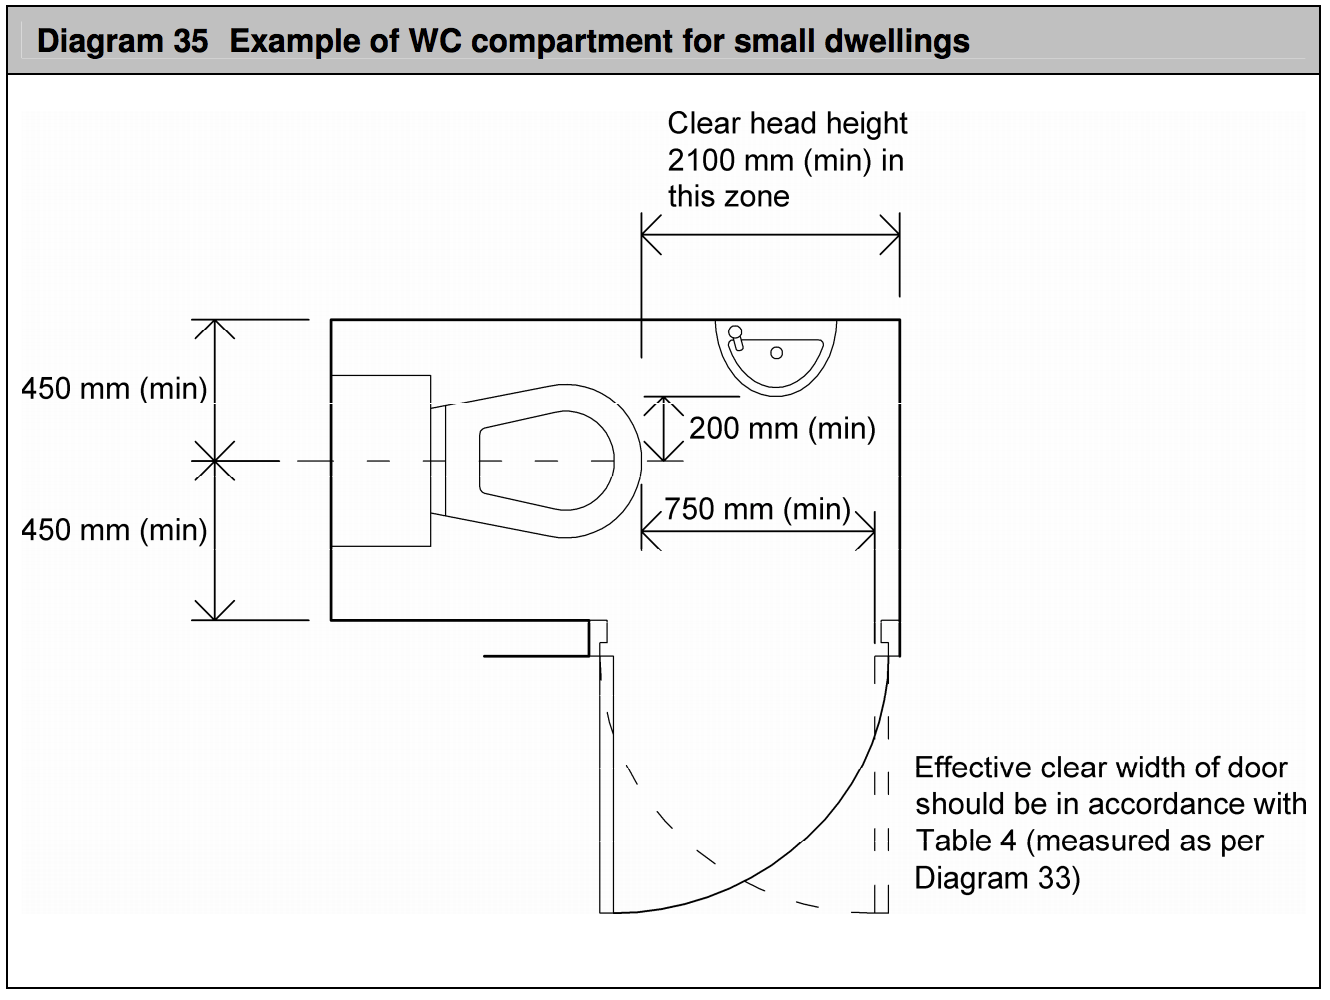 Diagram HM4 - Example of WC compartment for small dwellings - Extract from TGD M